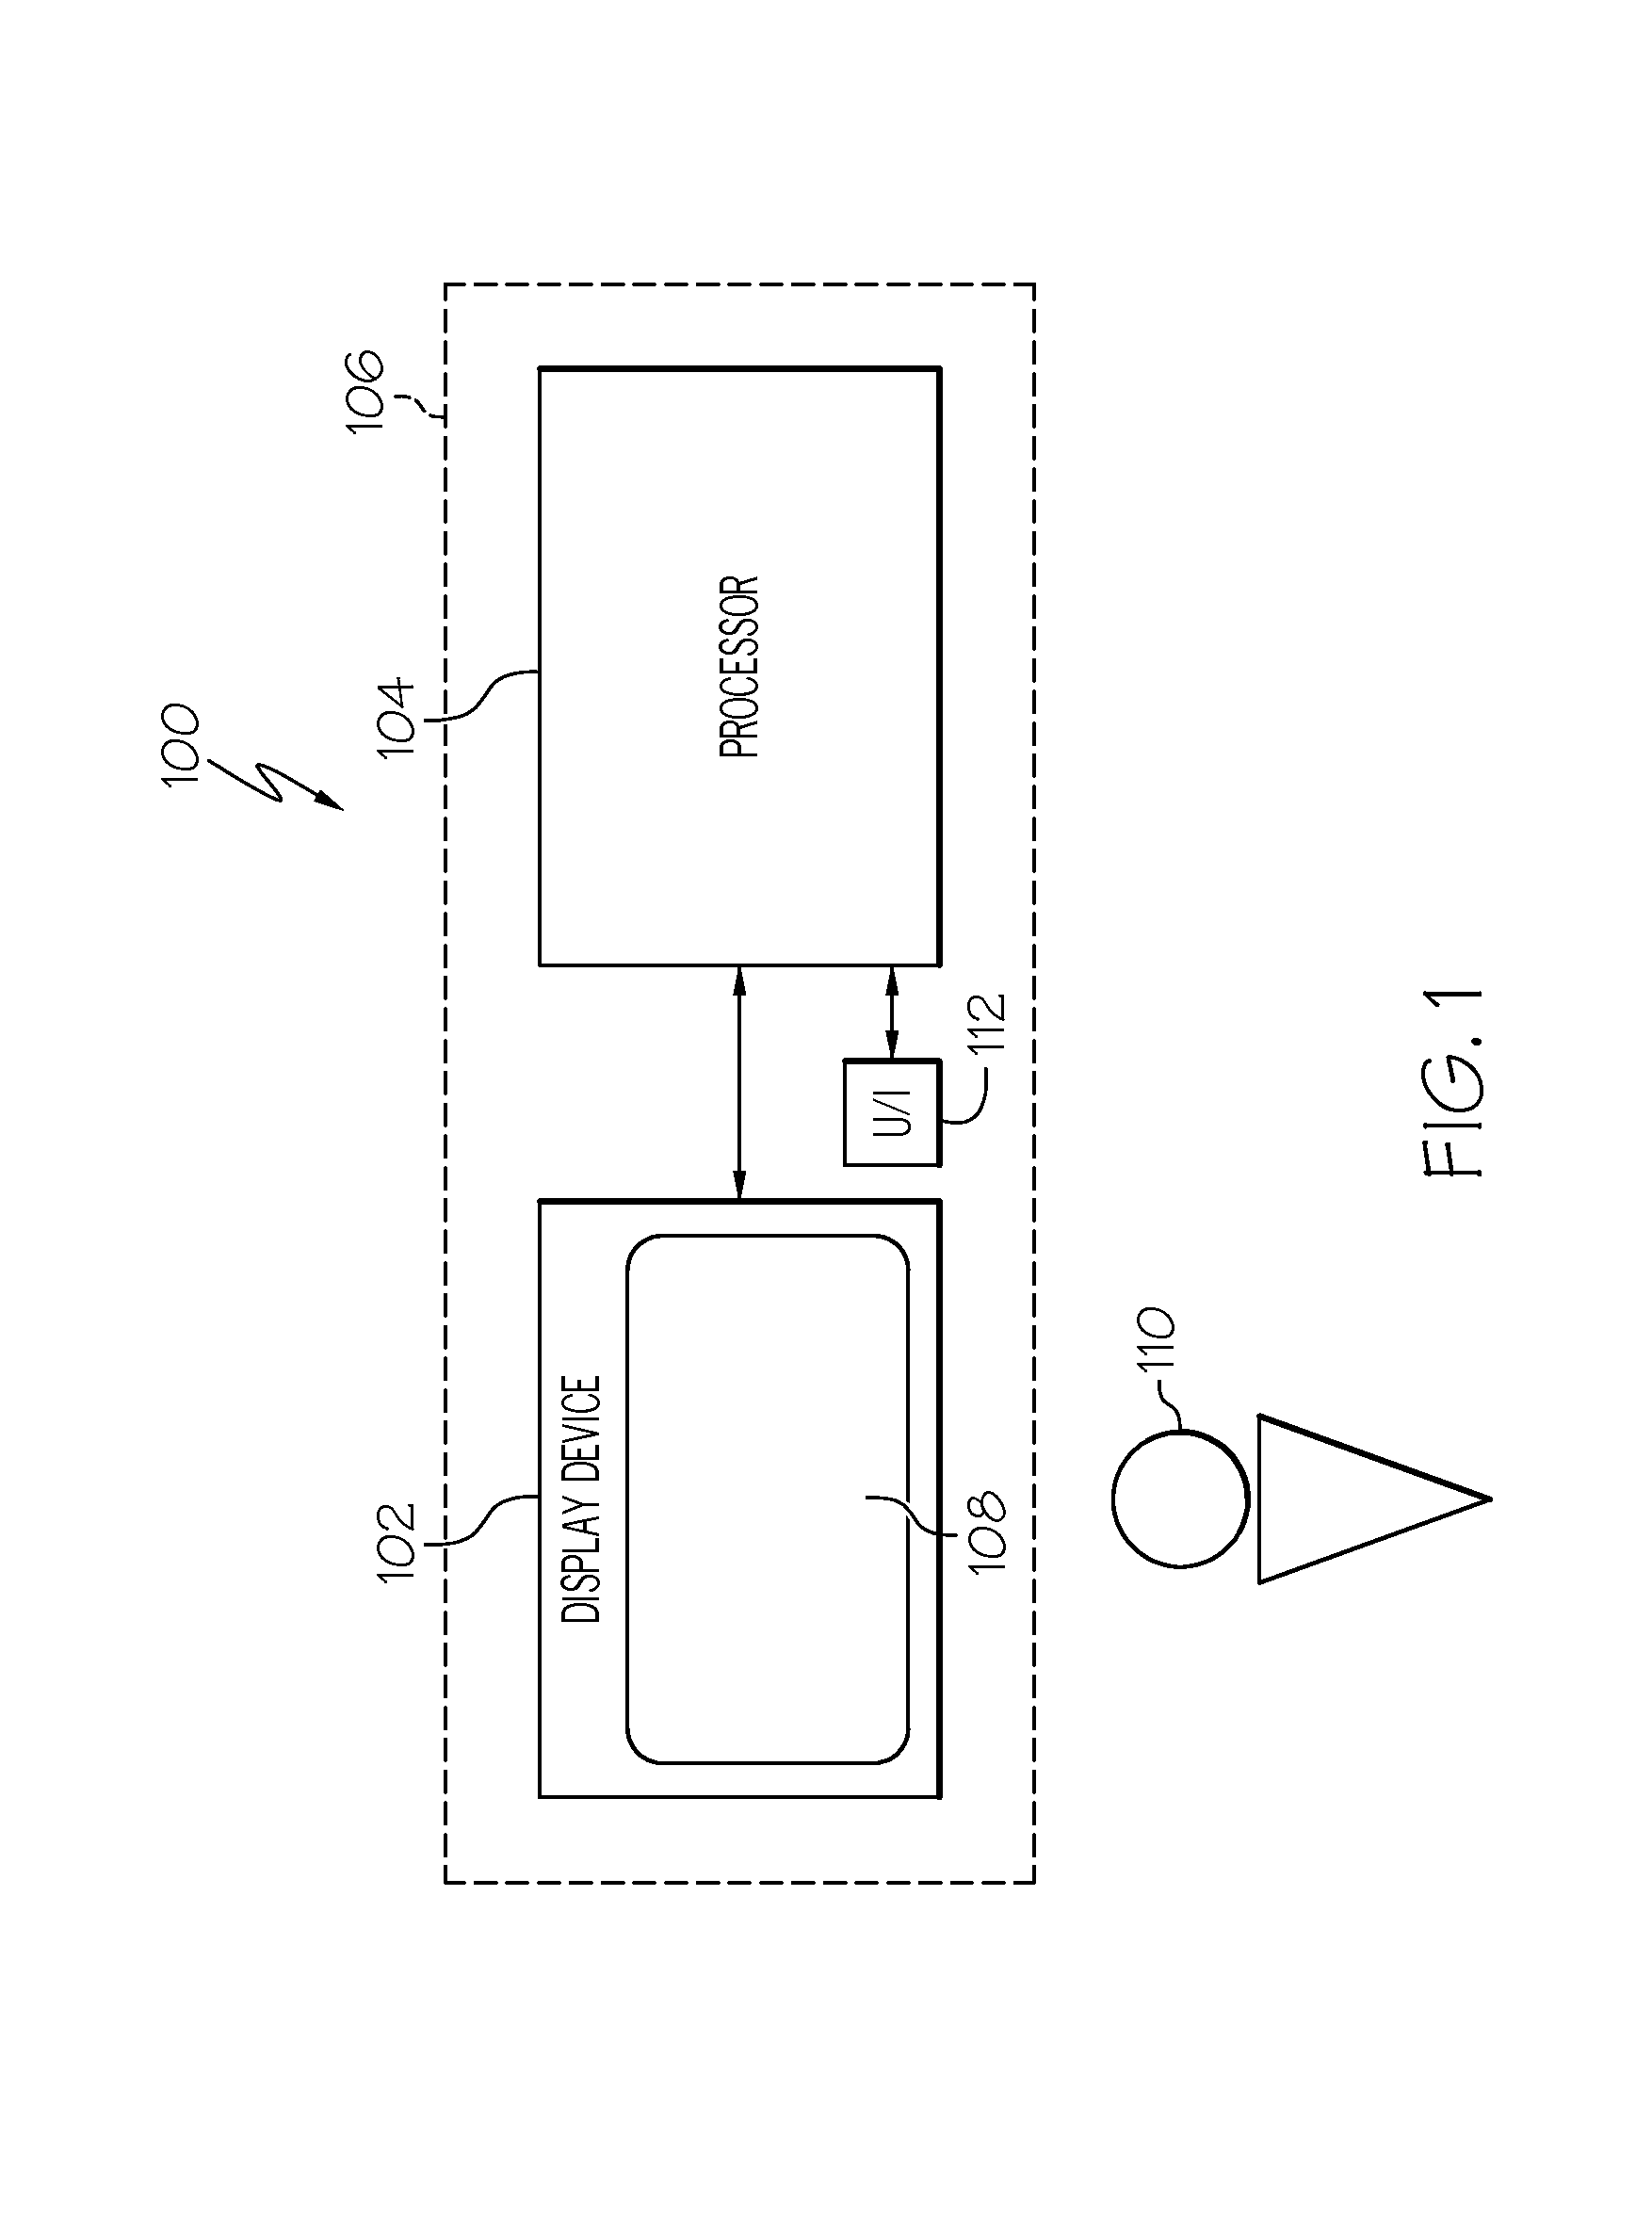 System and method for protecting the privacy of objects rendered on a display